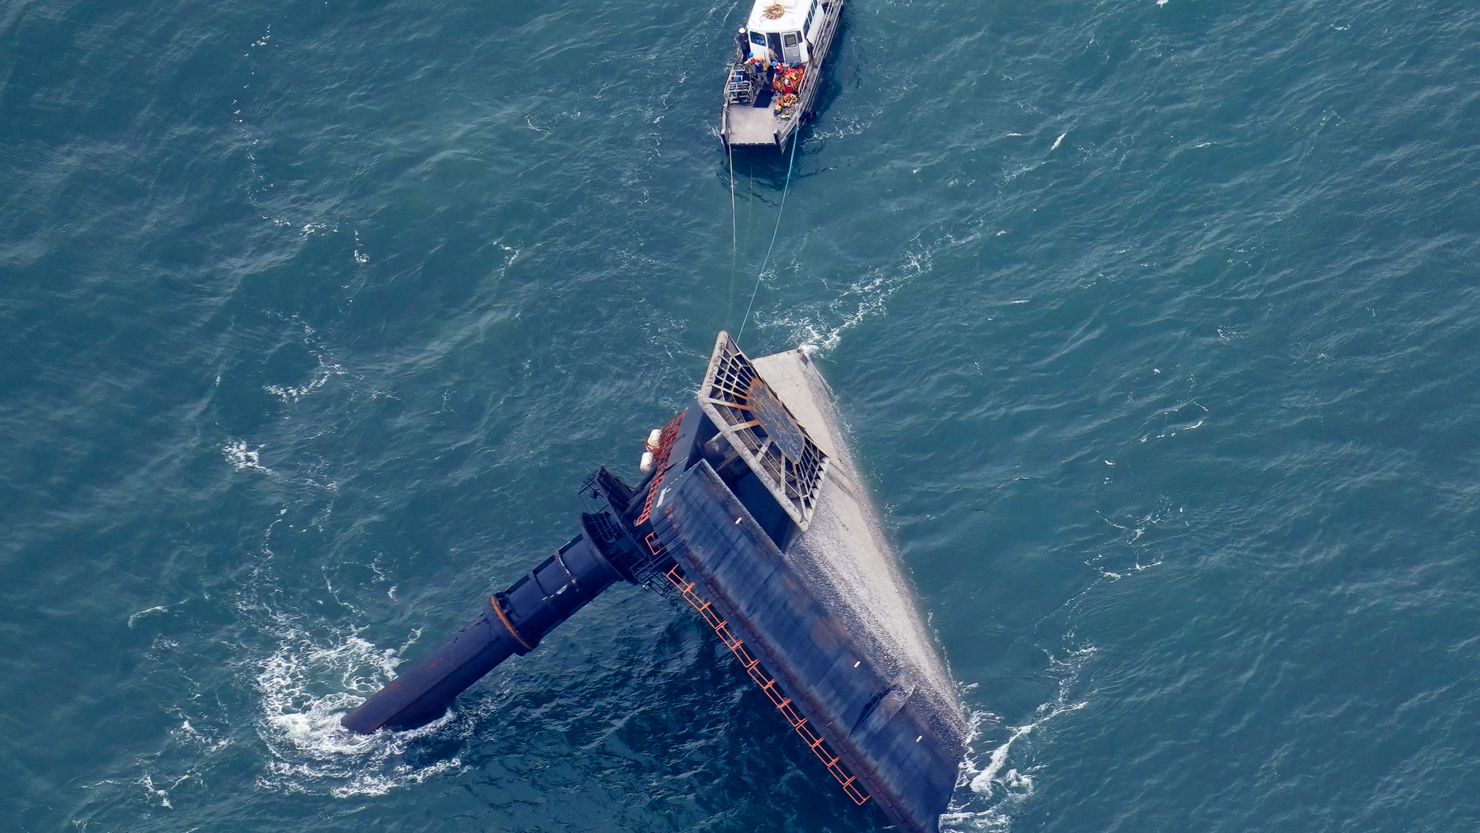 A rescue boat is seen next to the capsized lift boat Seacor Power seven miles off the coast of Louisiana in the Gulf of Mexico Sunday, April 18, 2021.